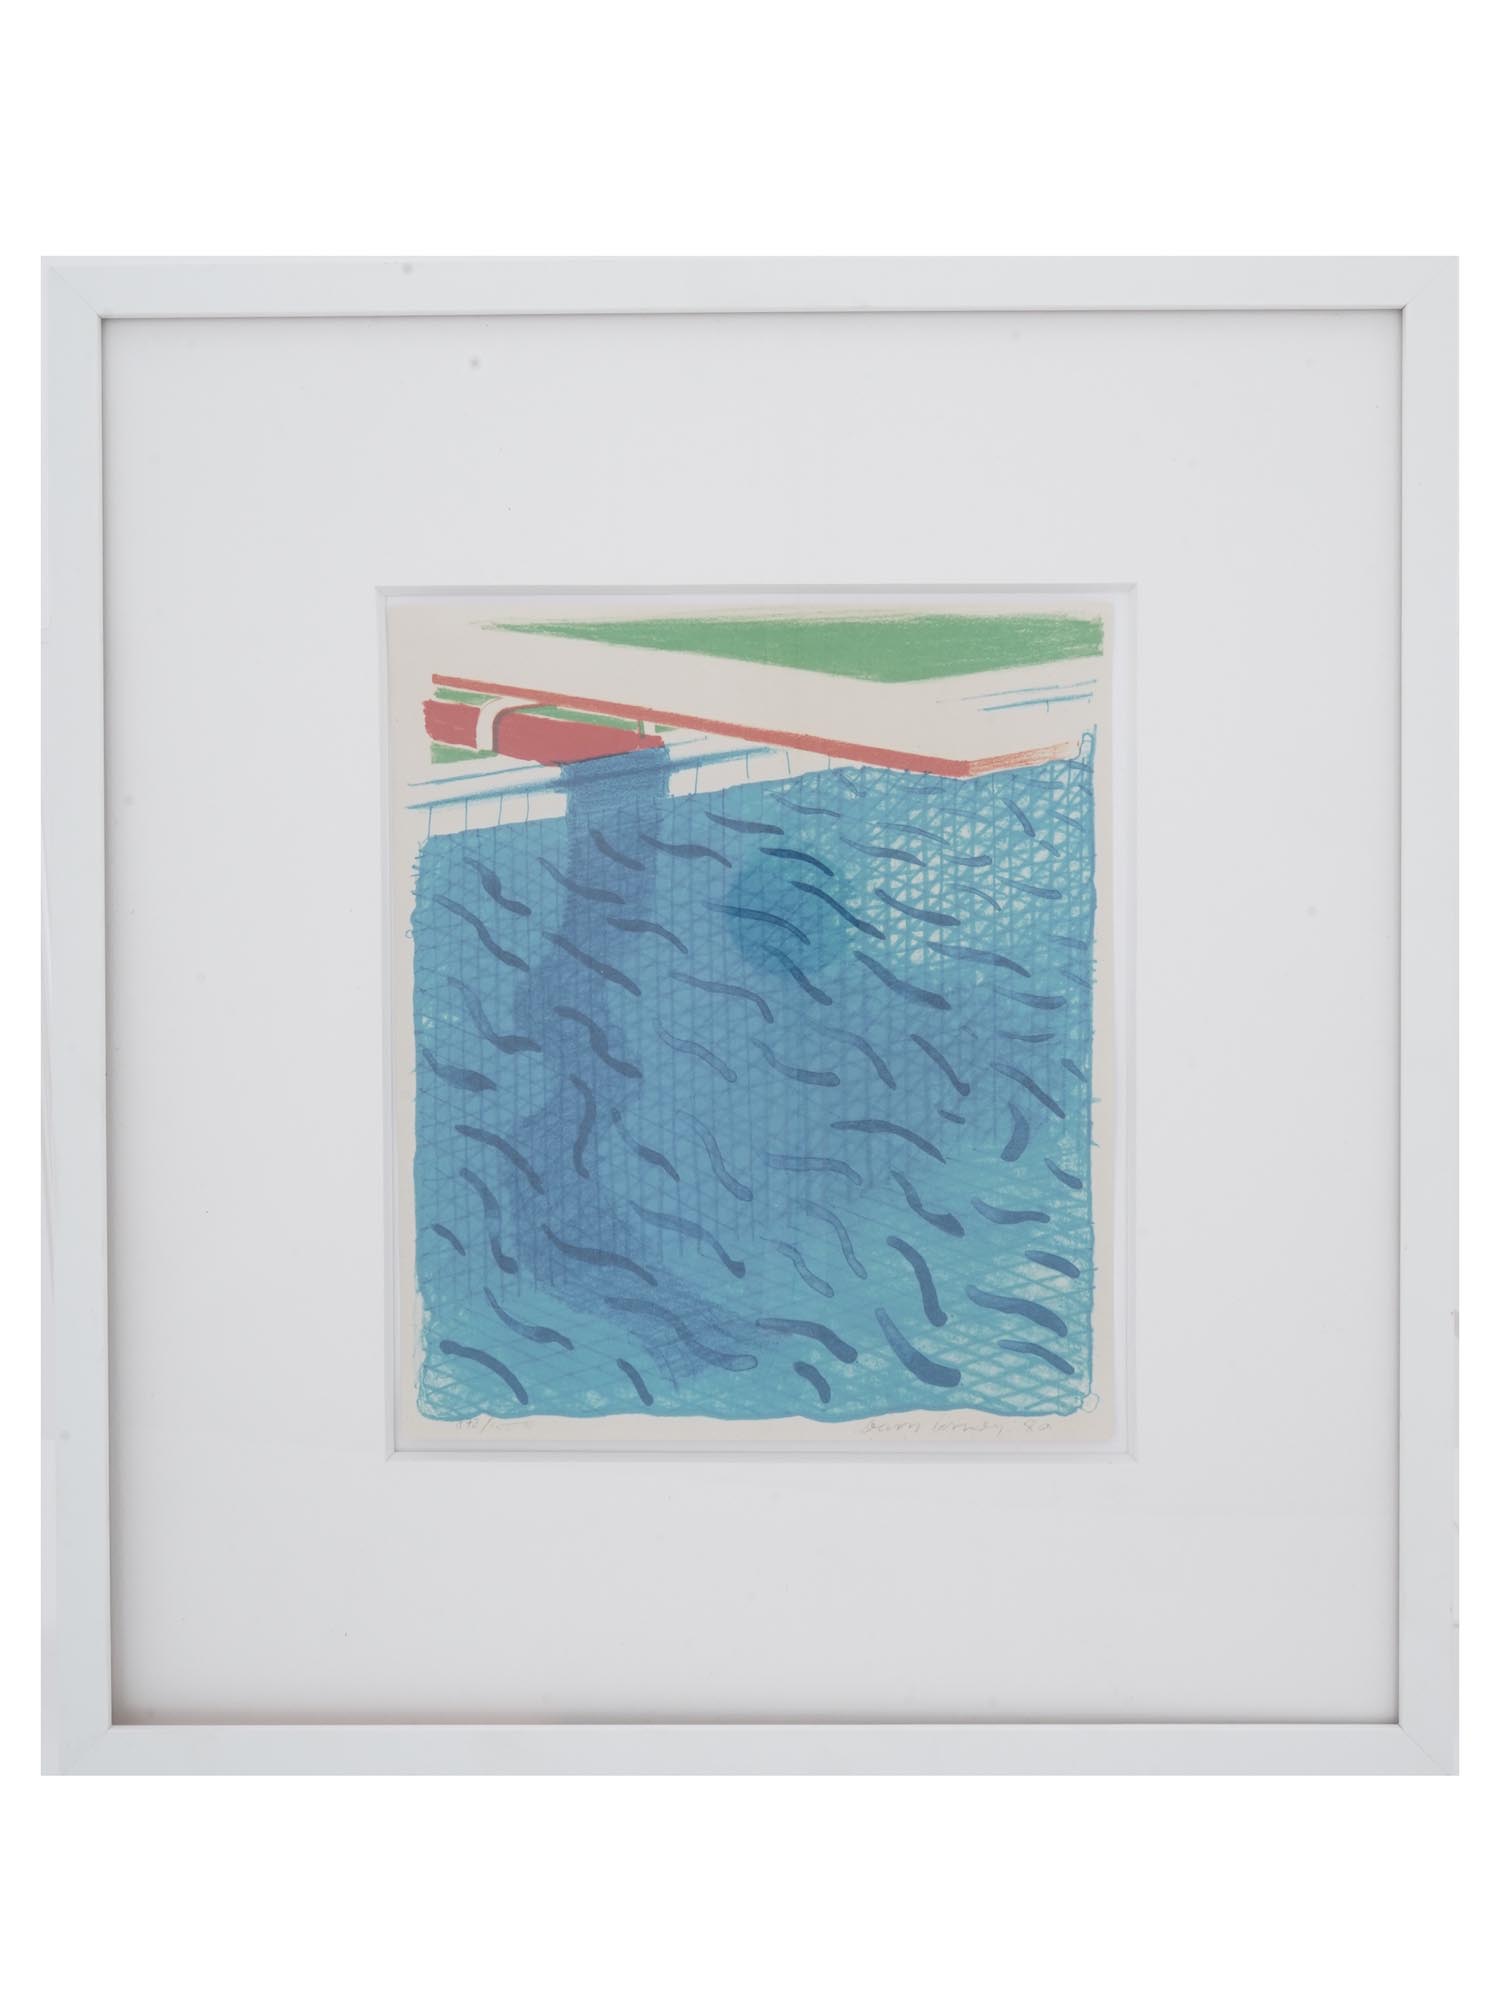 POOL COLOR LITHOGRAPH WITH BOOK BY DAVID HOCKNEY PIC-1